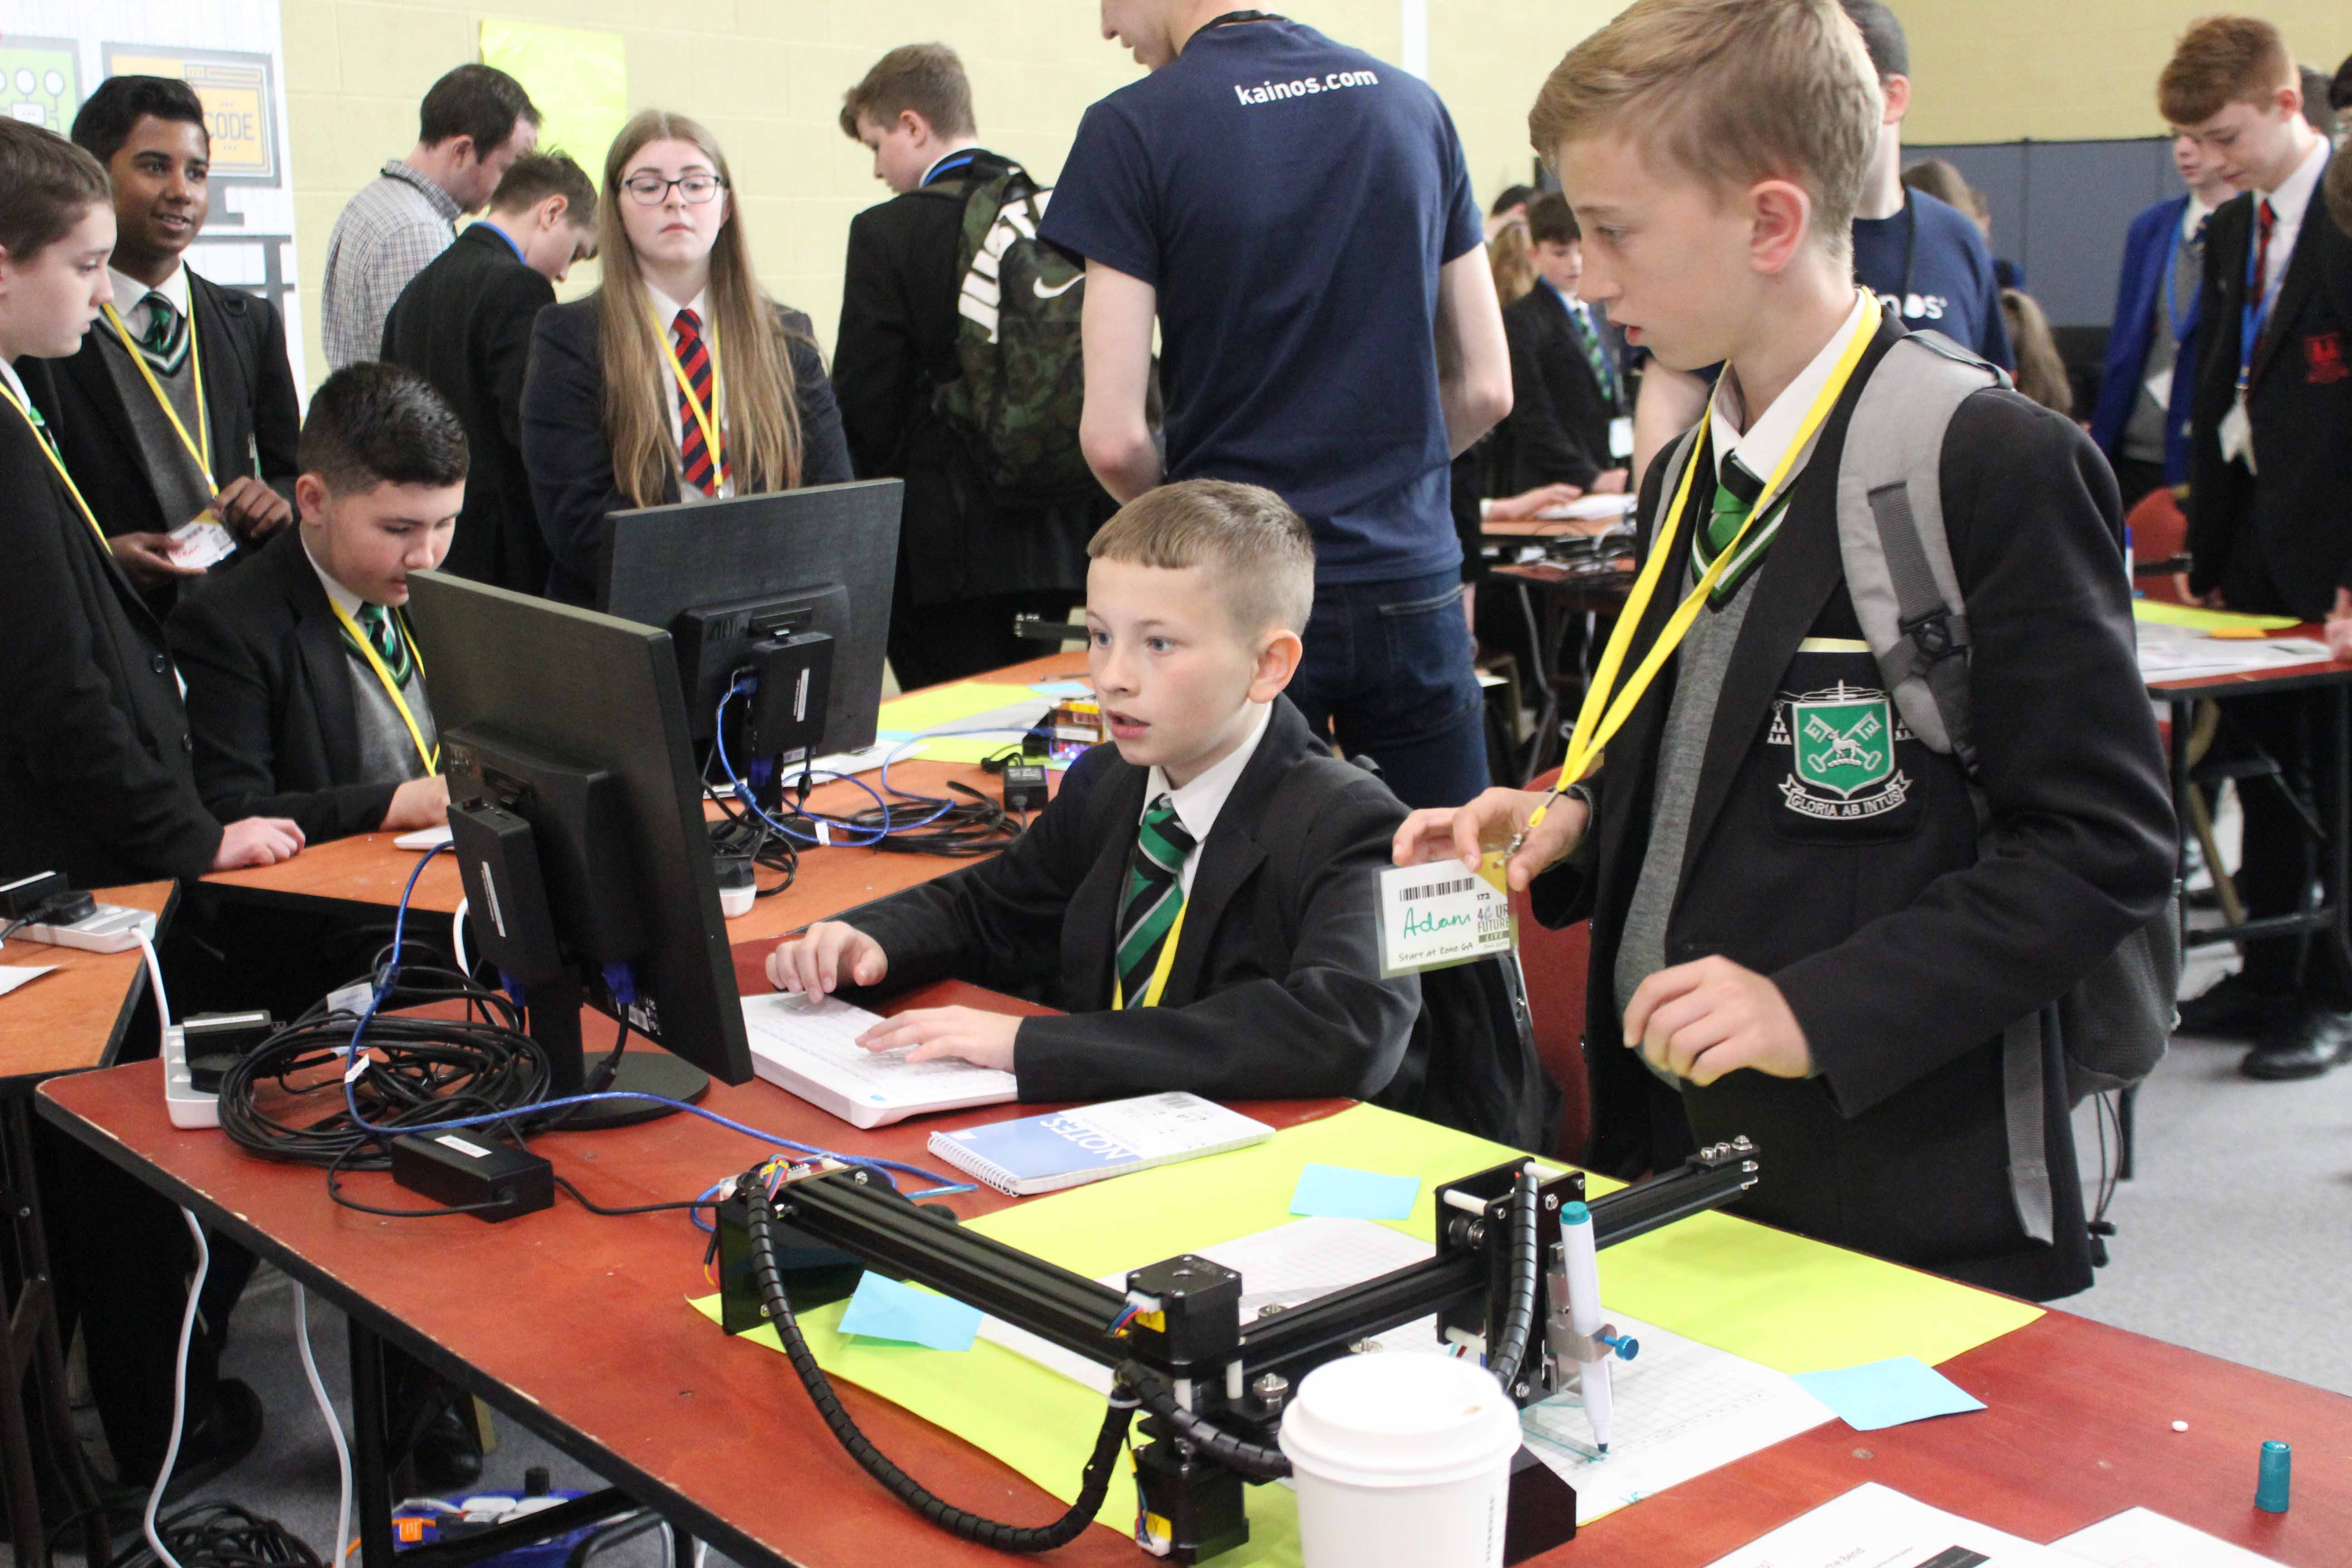 9 Schools In NI Take Part In Innovative Careers and Skills Event